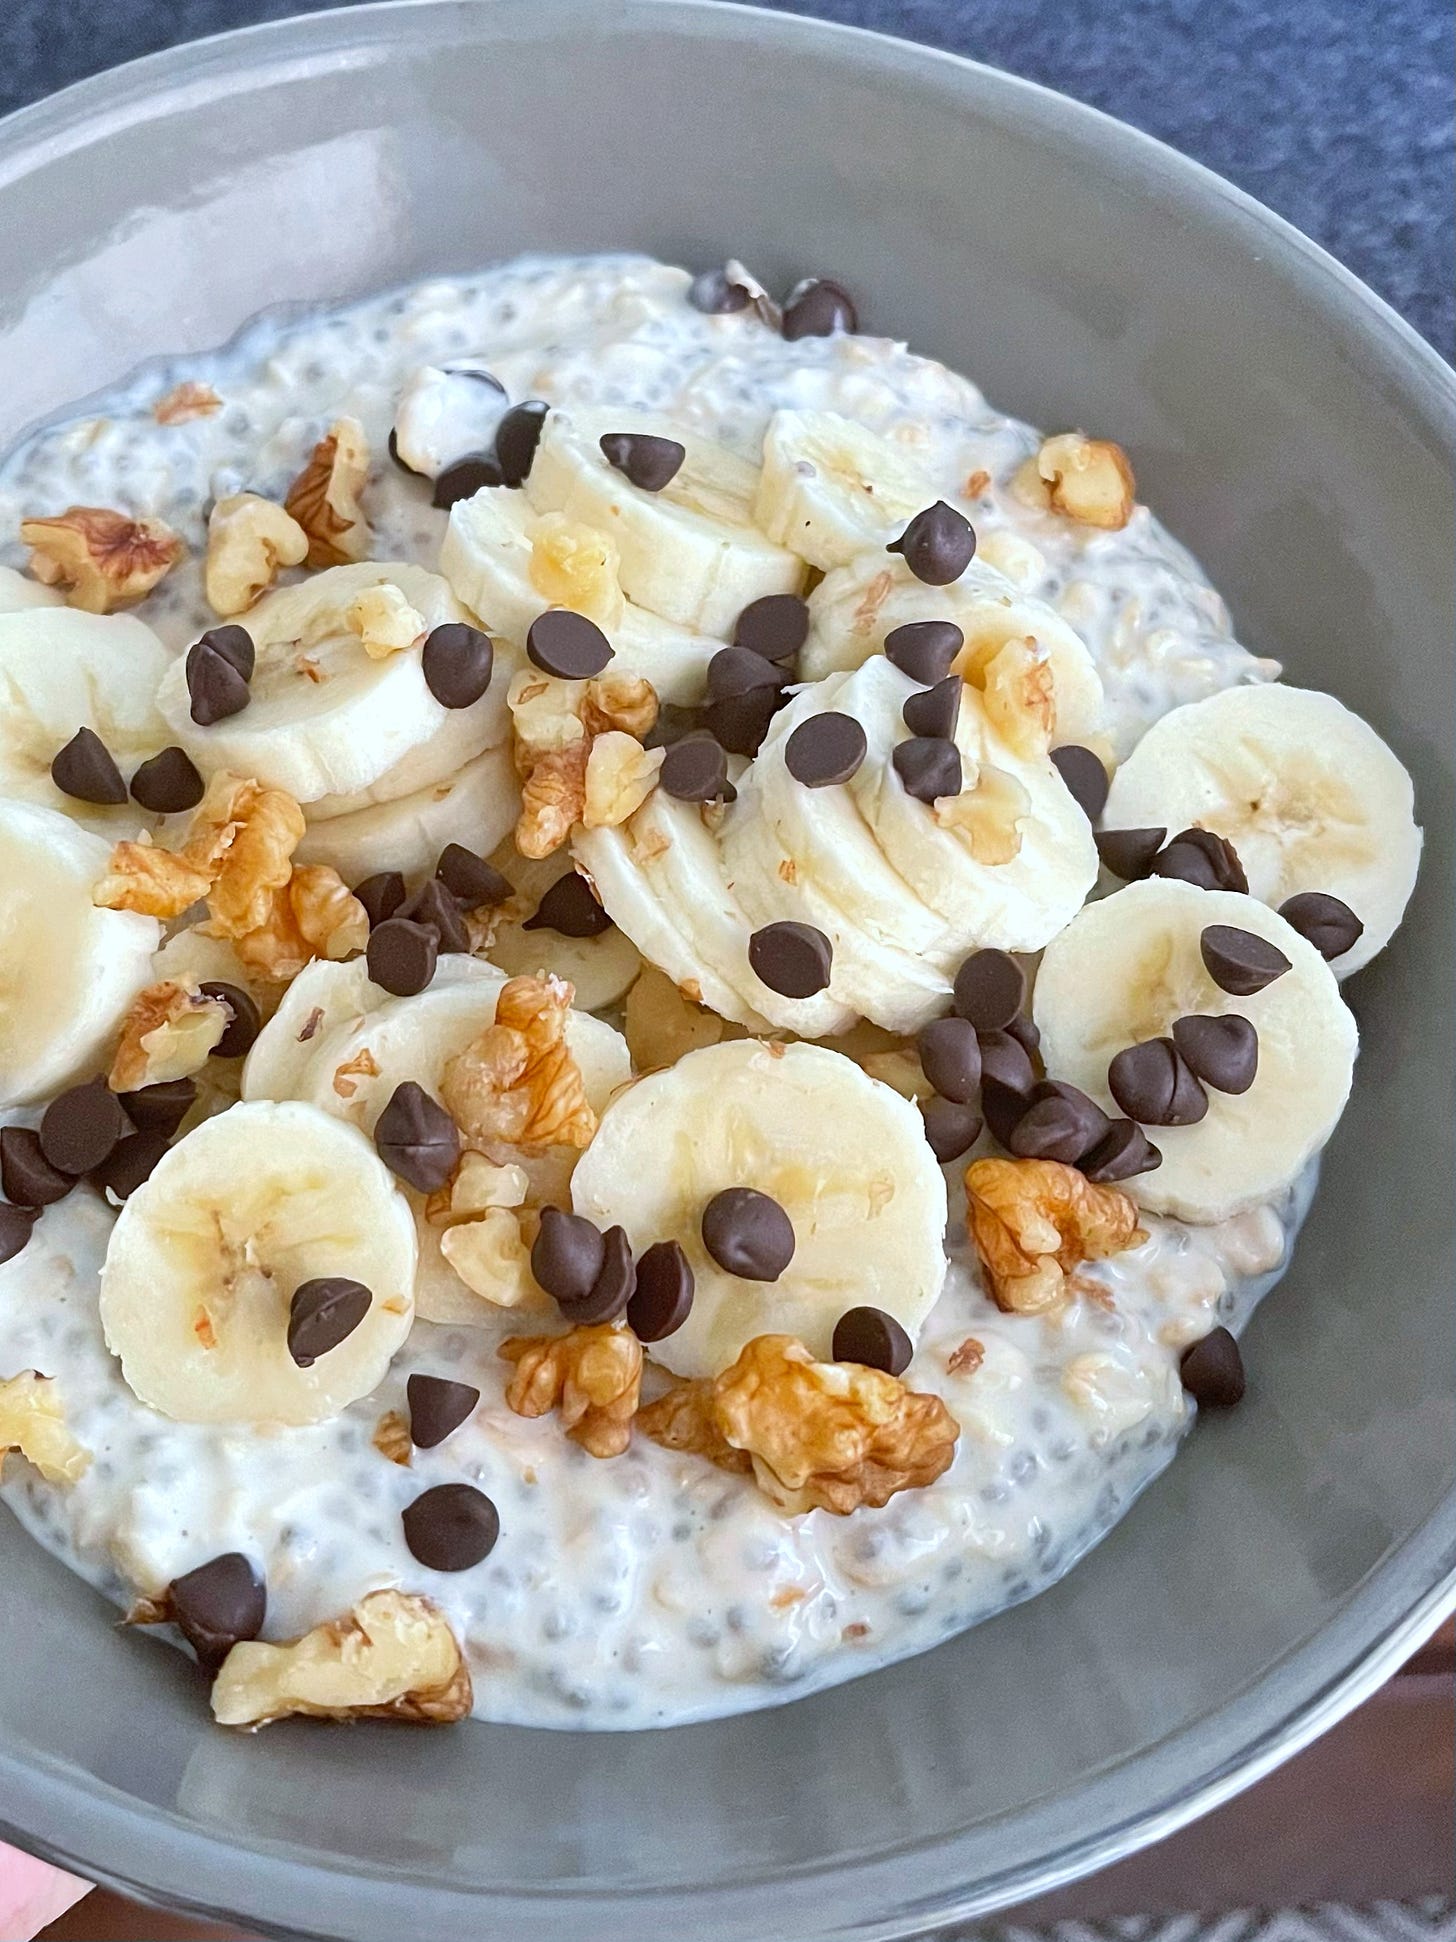 Overnight oats with bananas, walnuts and chocolate chips.